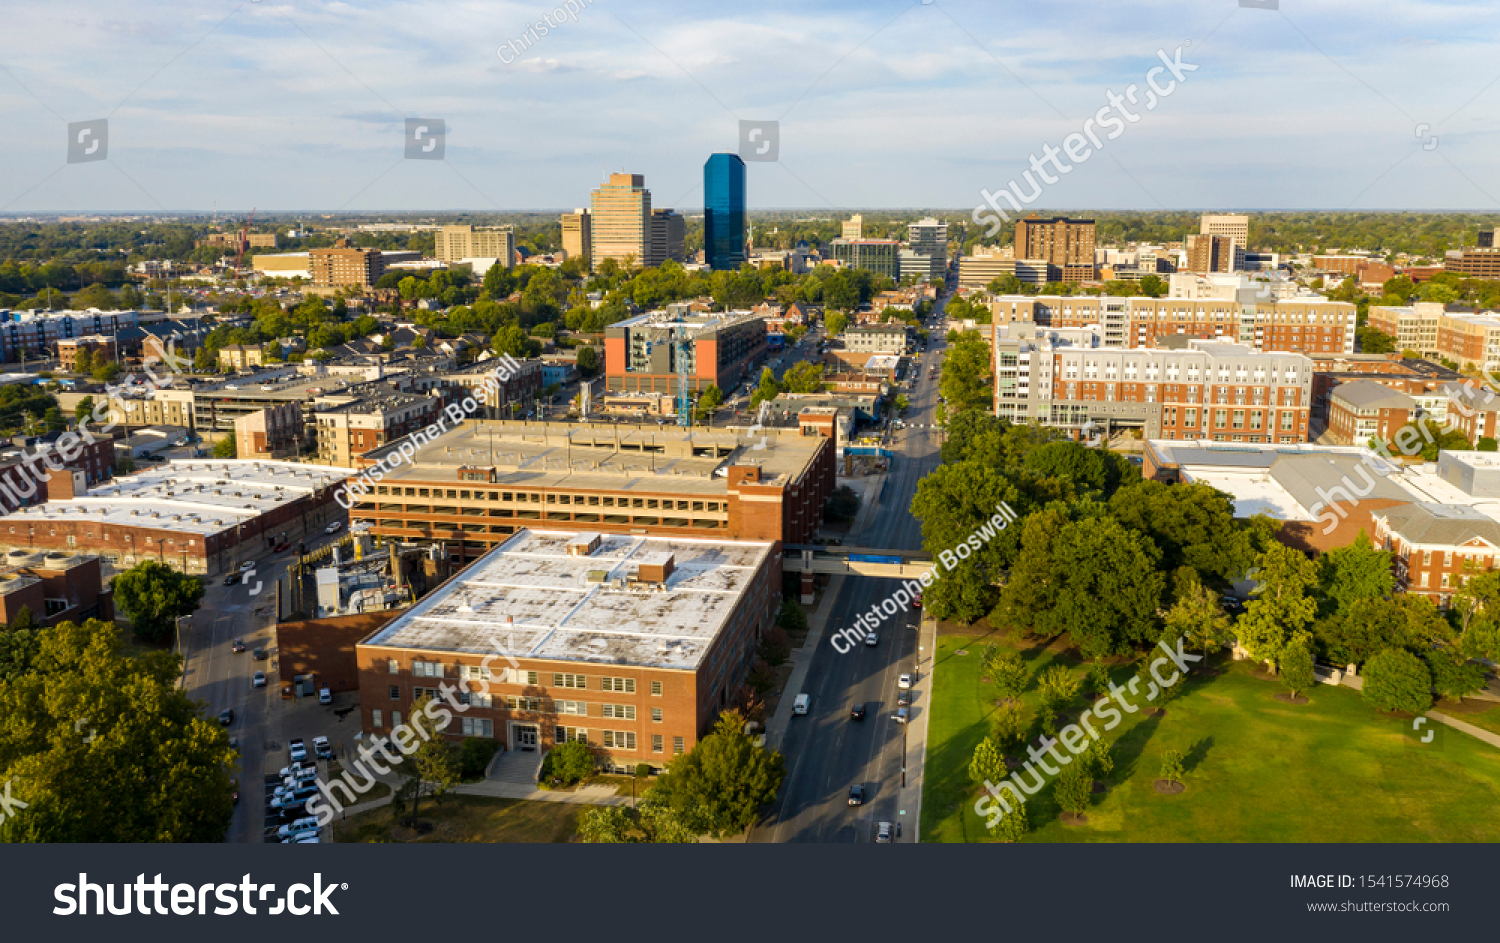 Aerial view university campus area looking into the city center urban core of downtown Lexington KY #1541574968